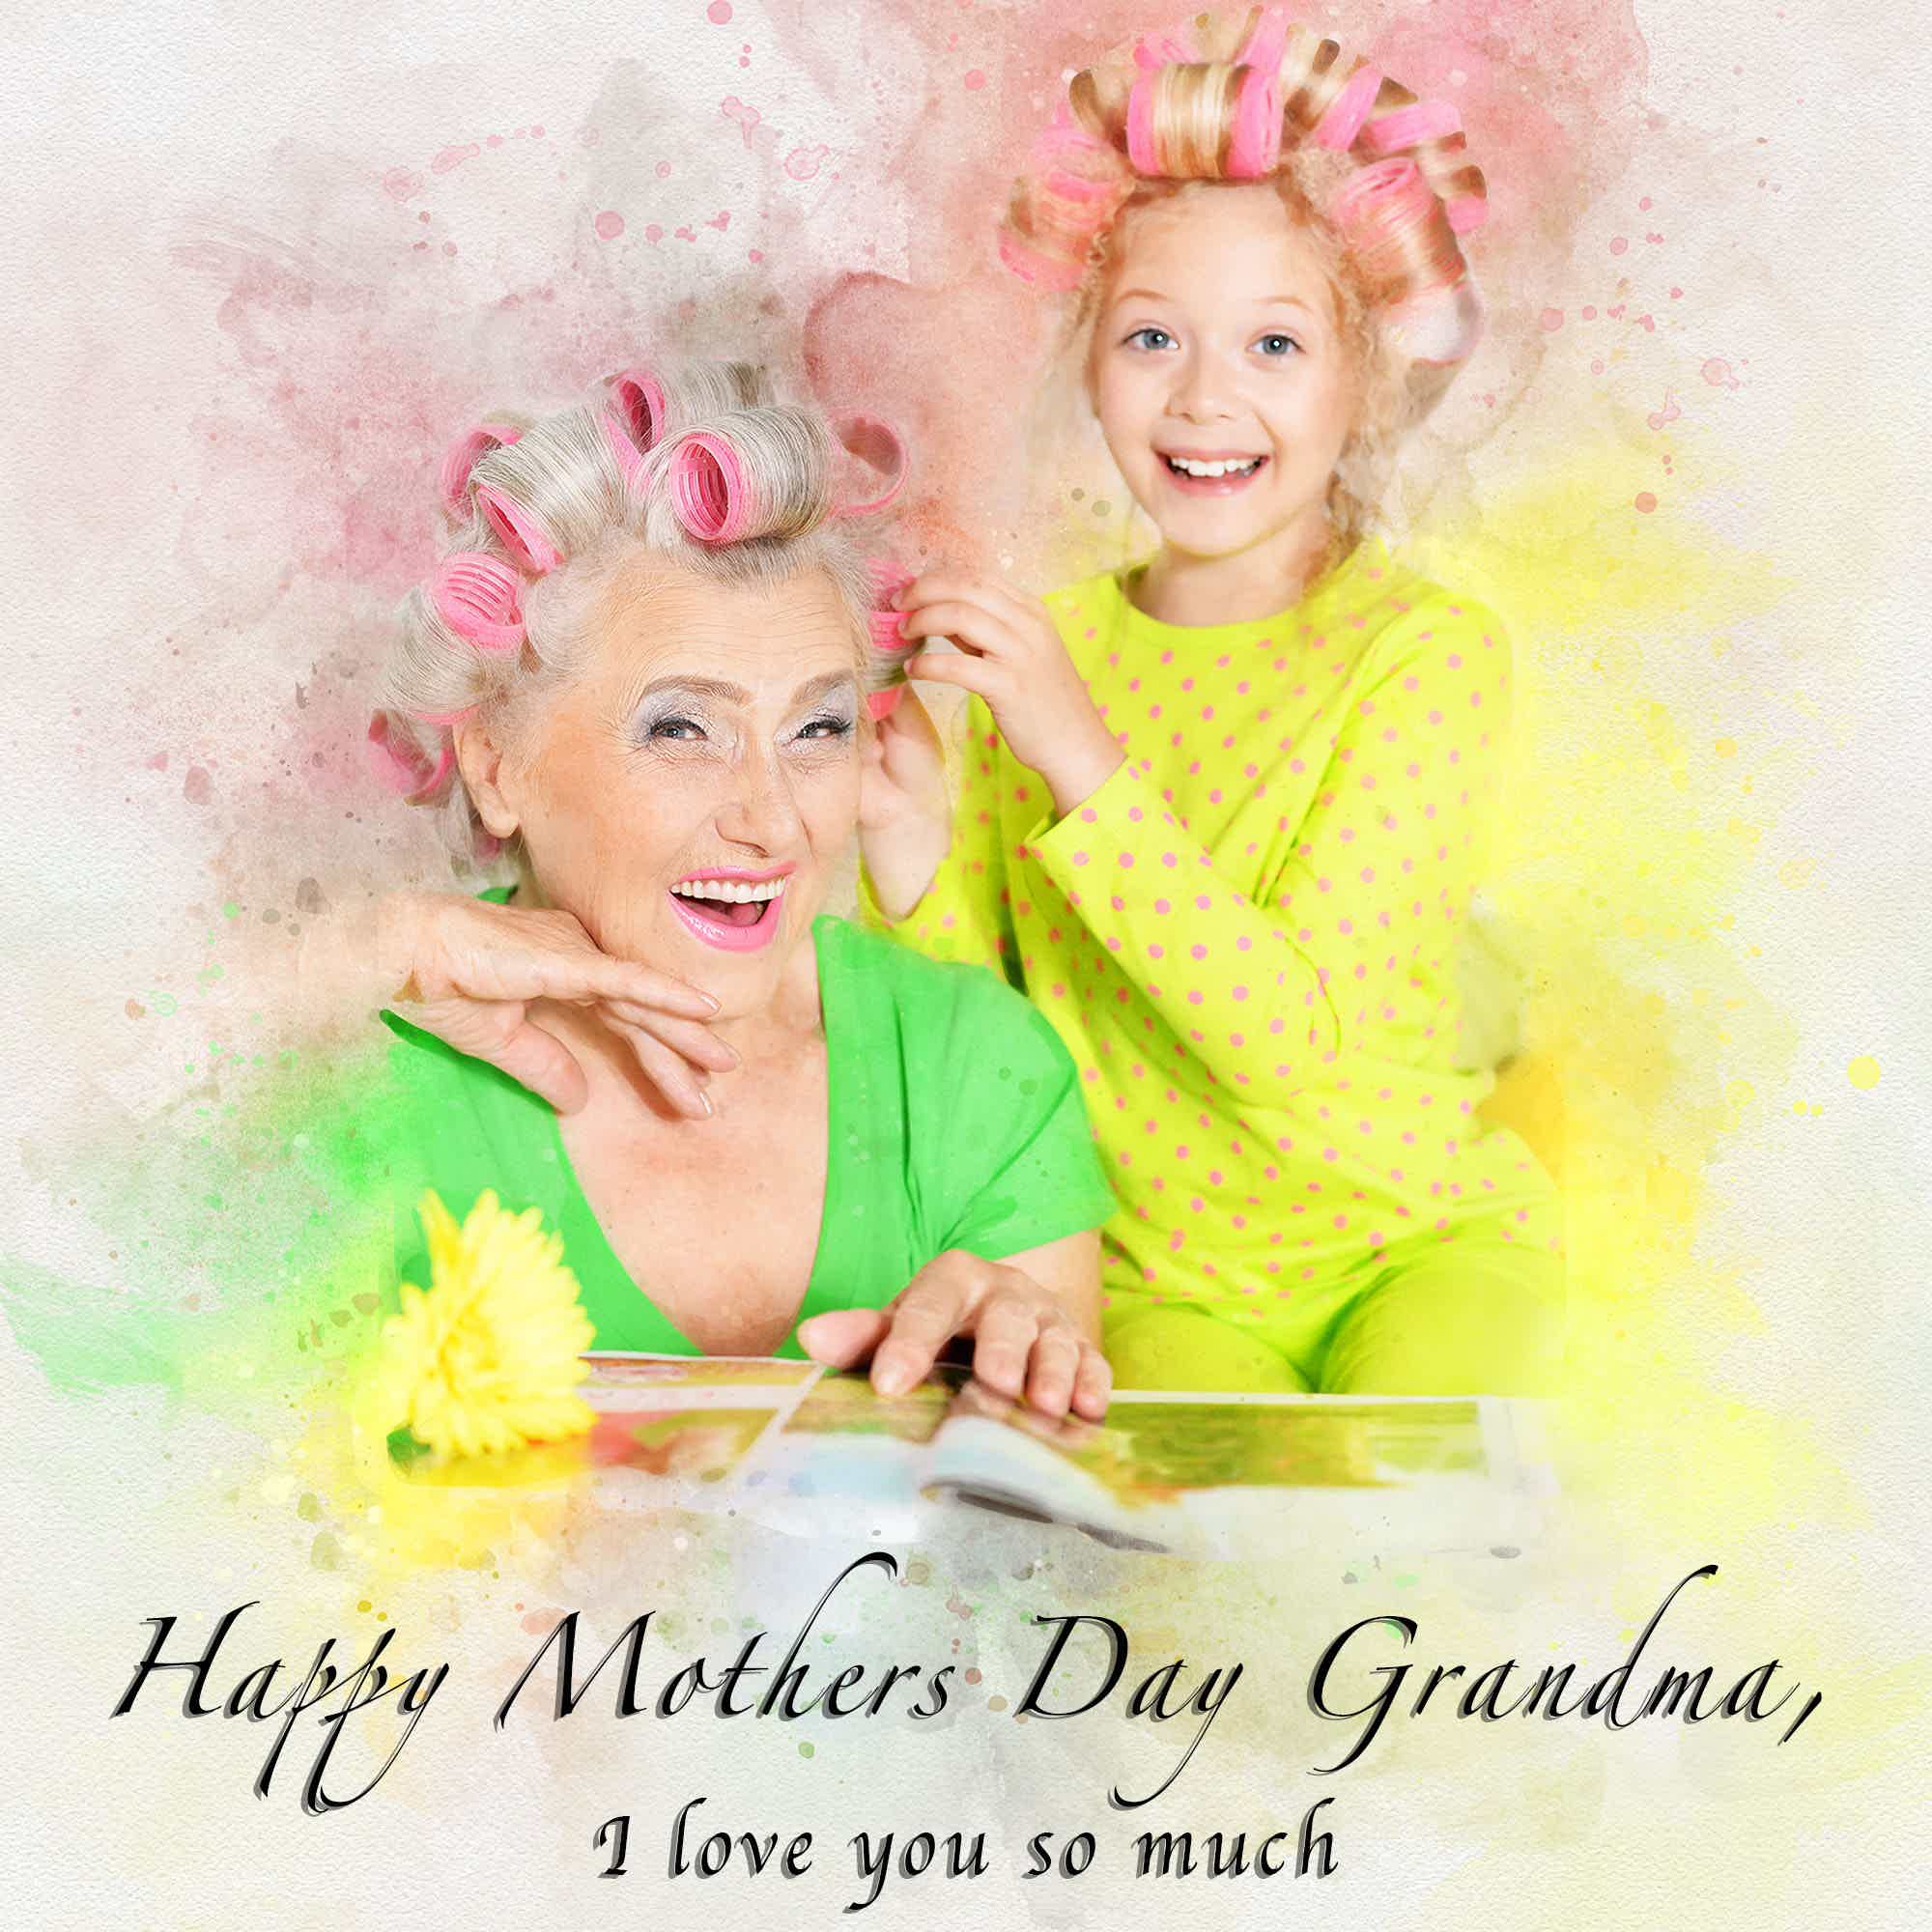 Best Mothers Day Gift Ideas | Best Gift Ideas for Grandmother, Granny, Grandma, and Grandparents. Portraits from Grandmother and Grandkids Baking, Family Painting from Photos – The Ultimate Gift for Any Occasion - FromPicToArt